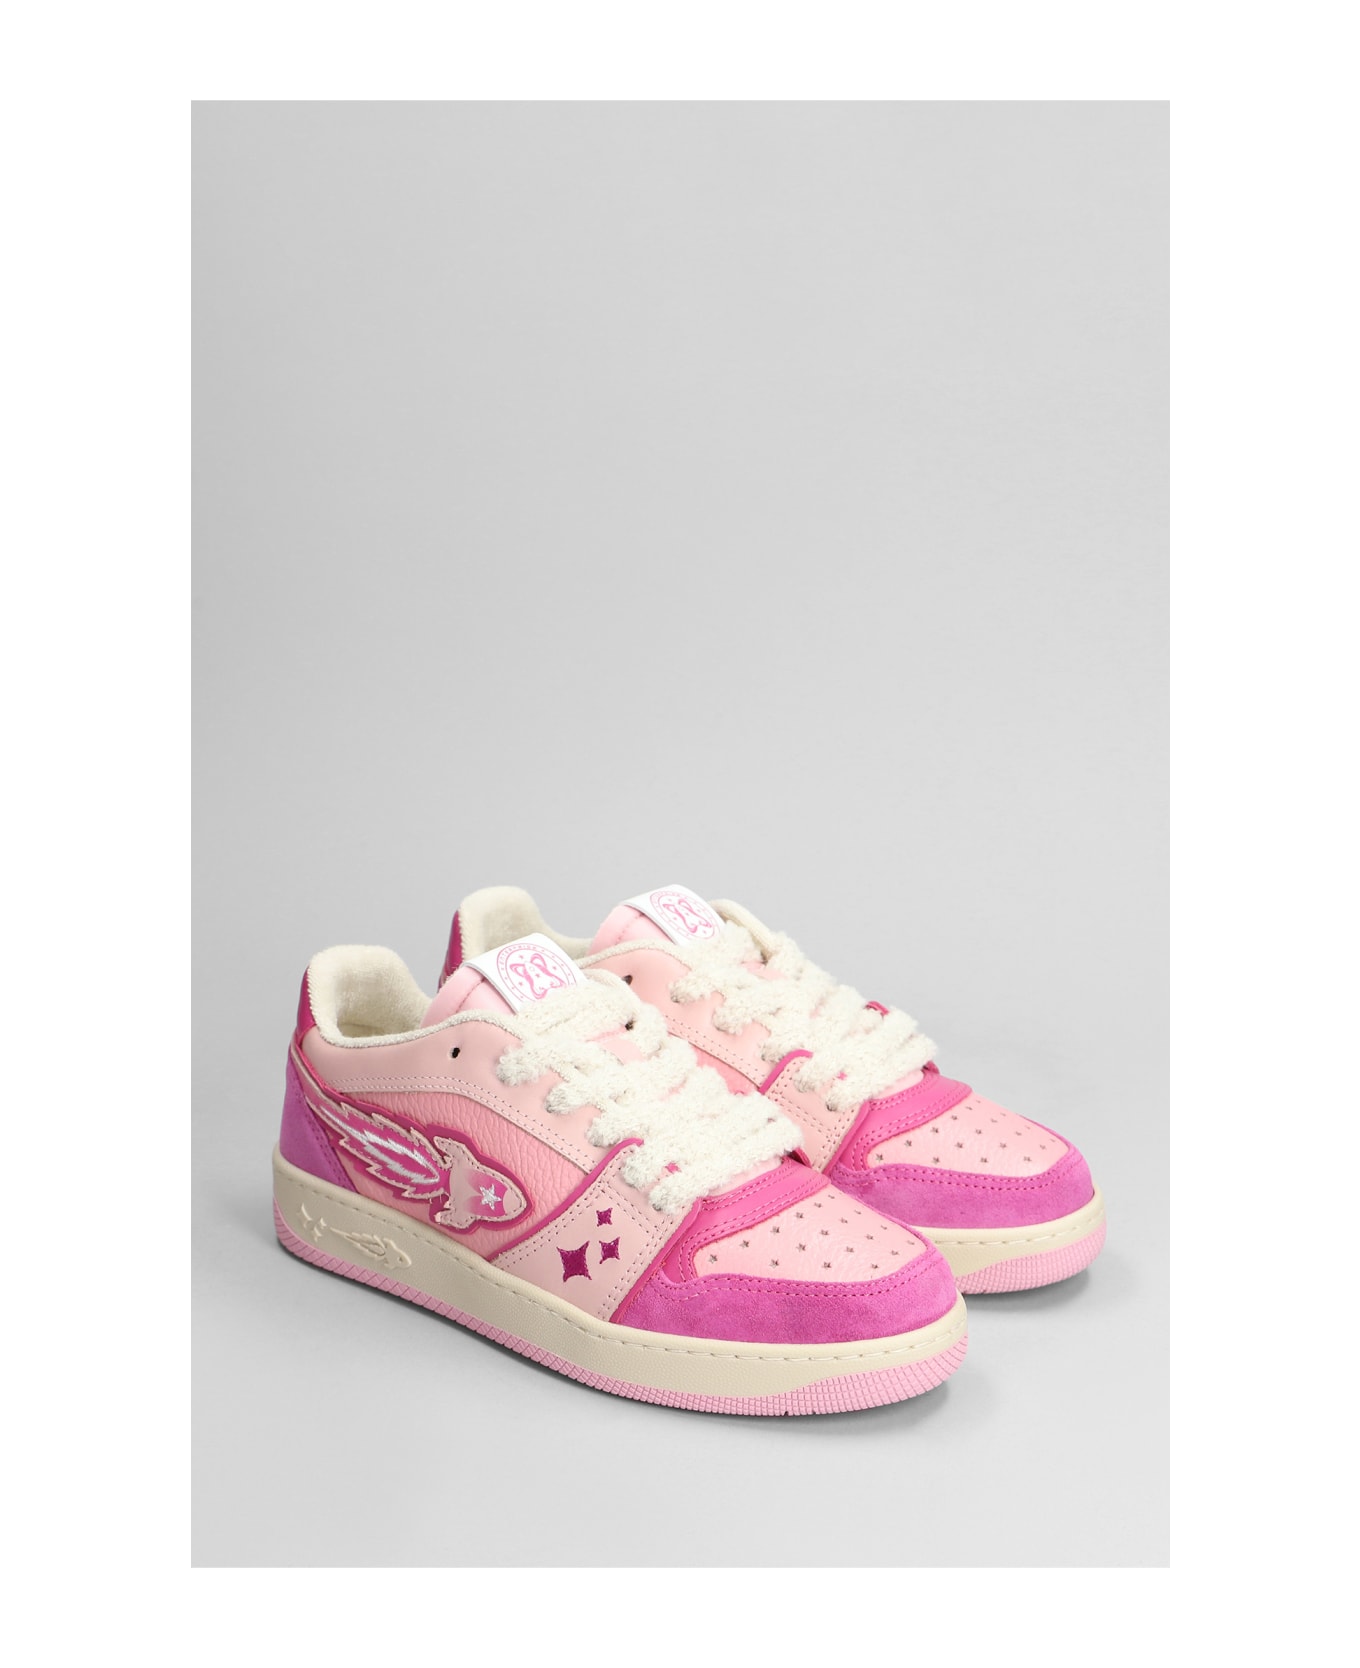 Enterprise Japan Sneakers In Rose-pink Suede And Leather - rose-pink スニーカー